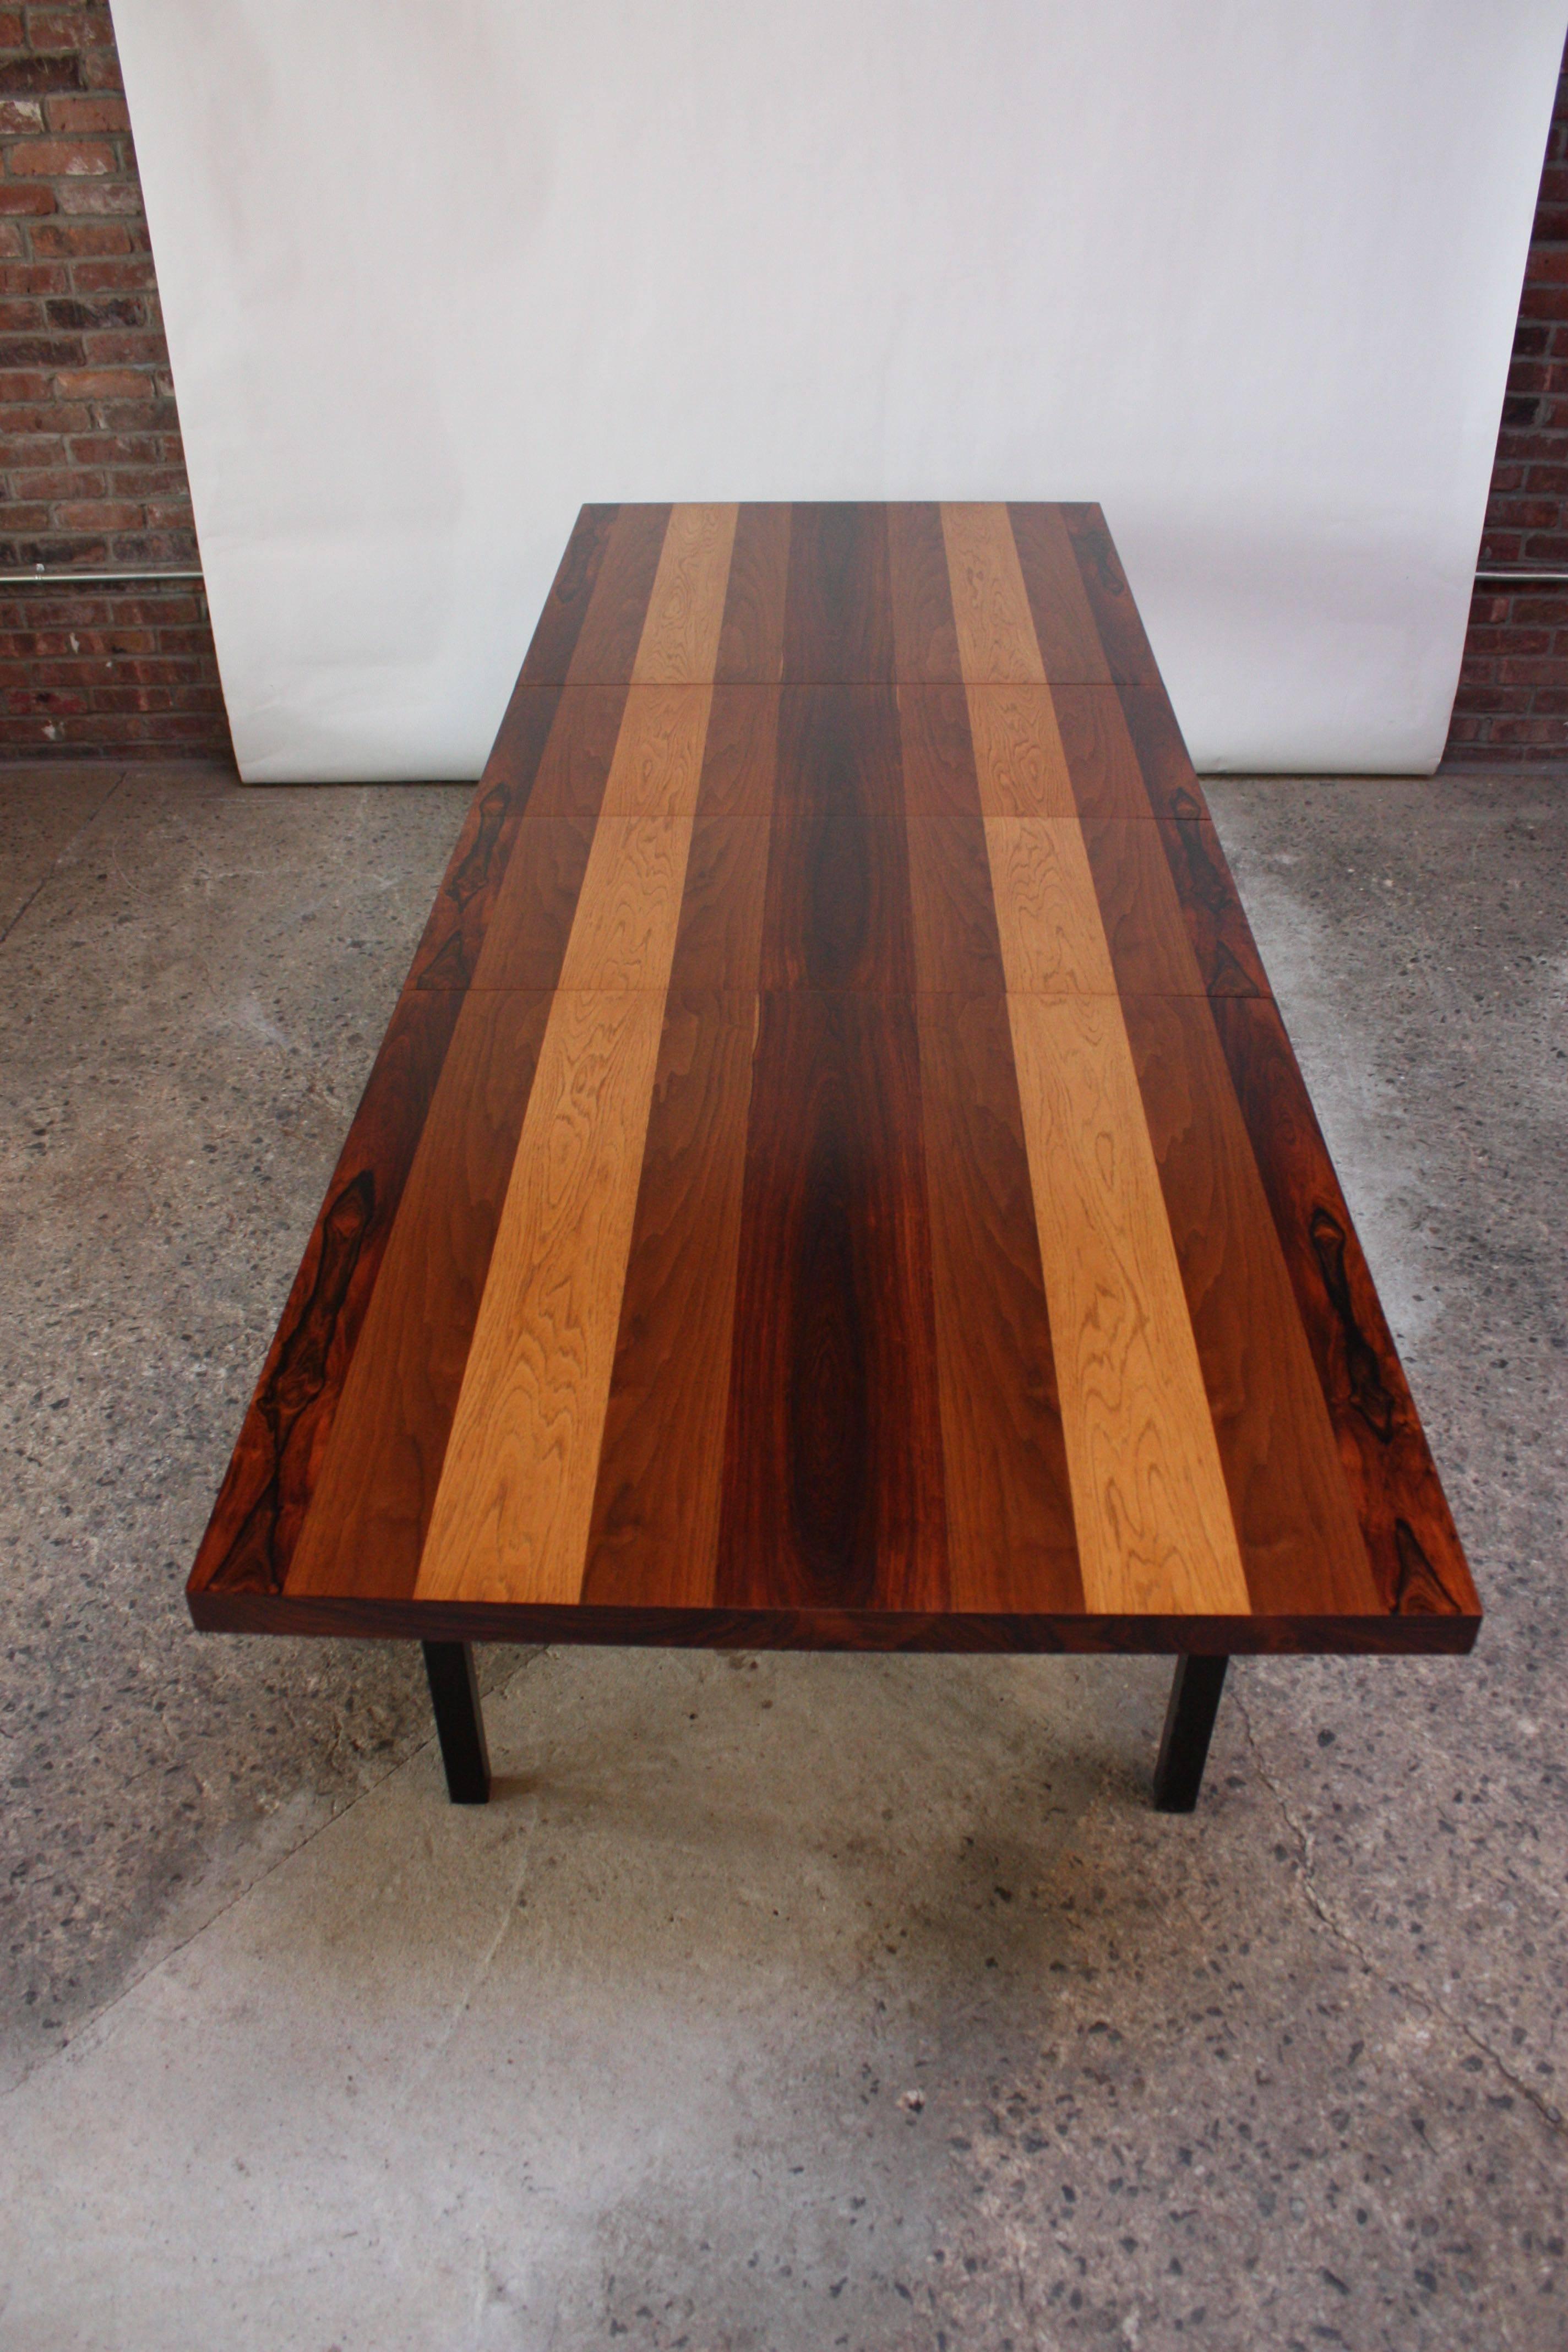 This Milo Baughman dining table was designed for Directional in the early 1960s and is composed of walnut, rosewood and English brown oak banding (original black lacquer on legs and apron is intact and is a matte finish, not polished or glossy). The